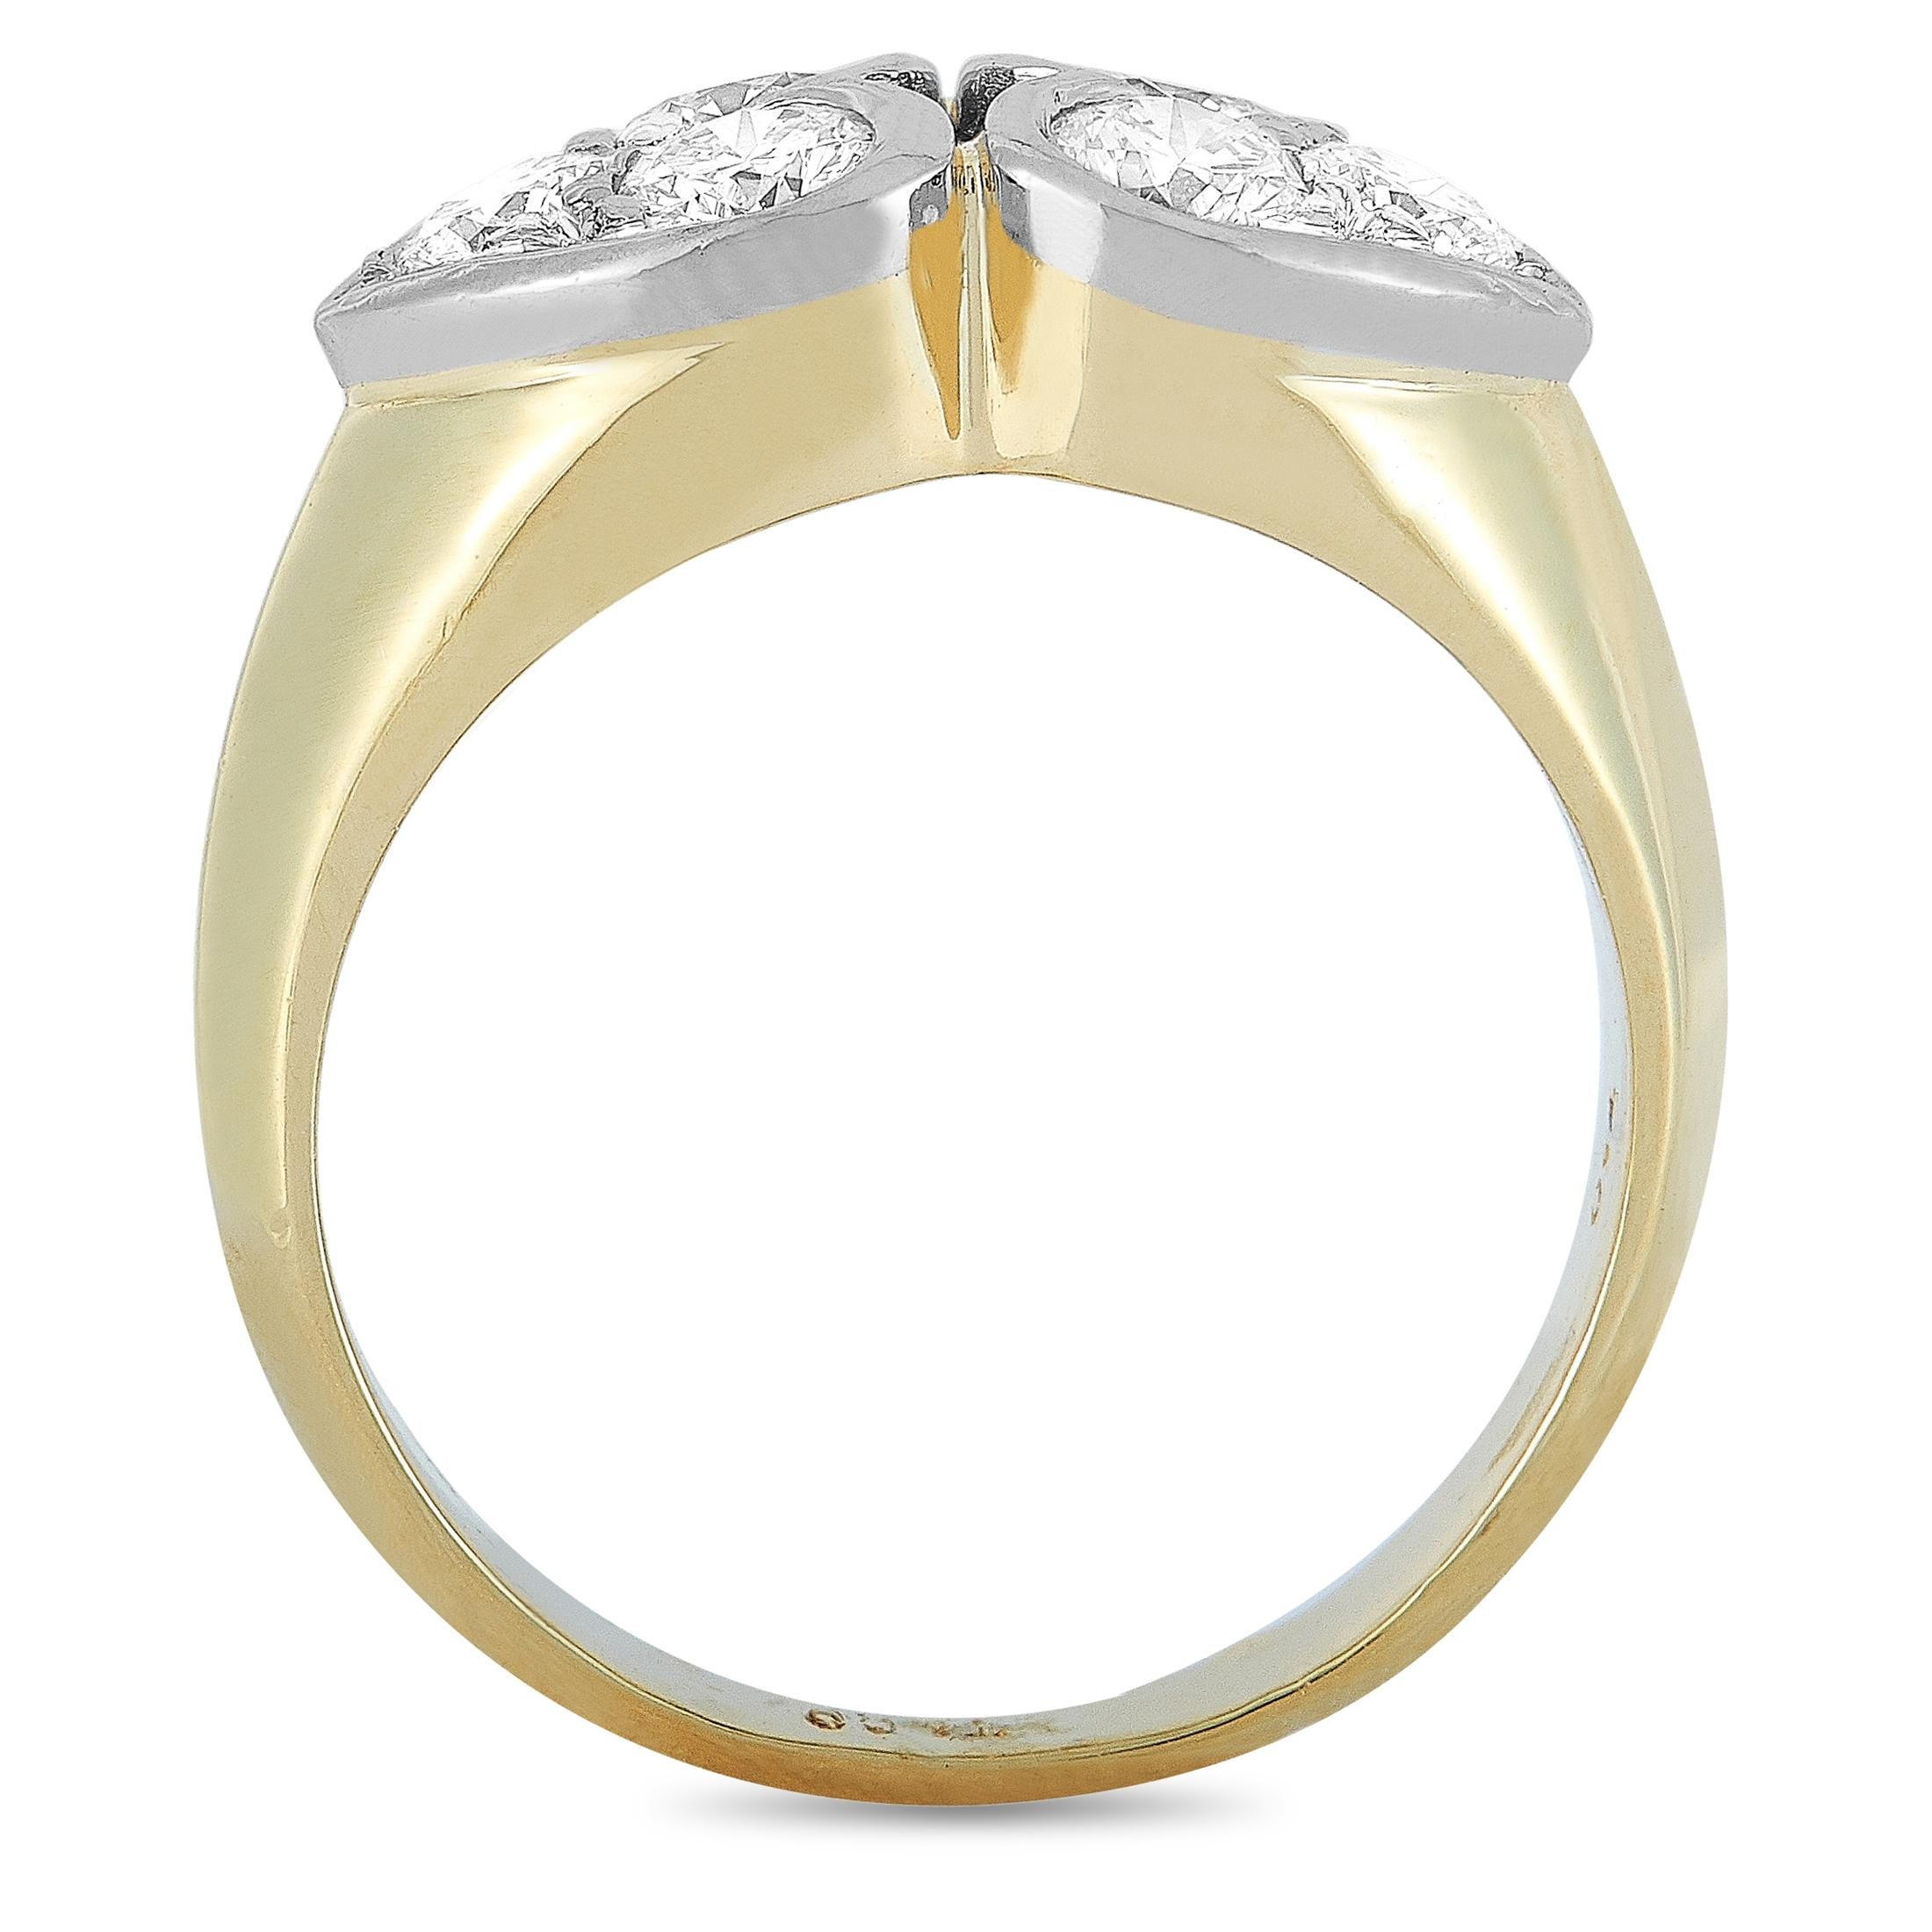 This Tiffany & Co. ring is made out of 18K yellow and white gold and weighs 5.3 grams. It boasts band thickness of 2 mm and top height of 4 mm, while top dimensions measure 15 by 8 mm. The ring is set with diamonds that feature grade F color and VS1